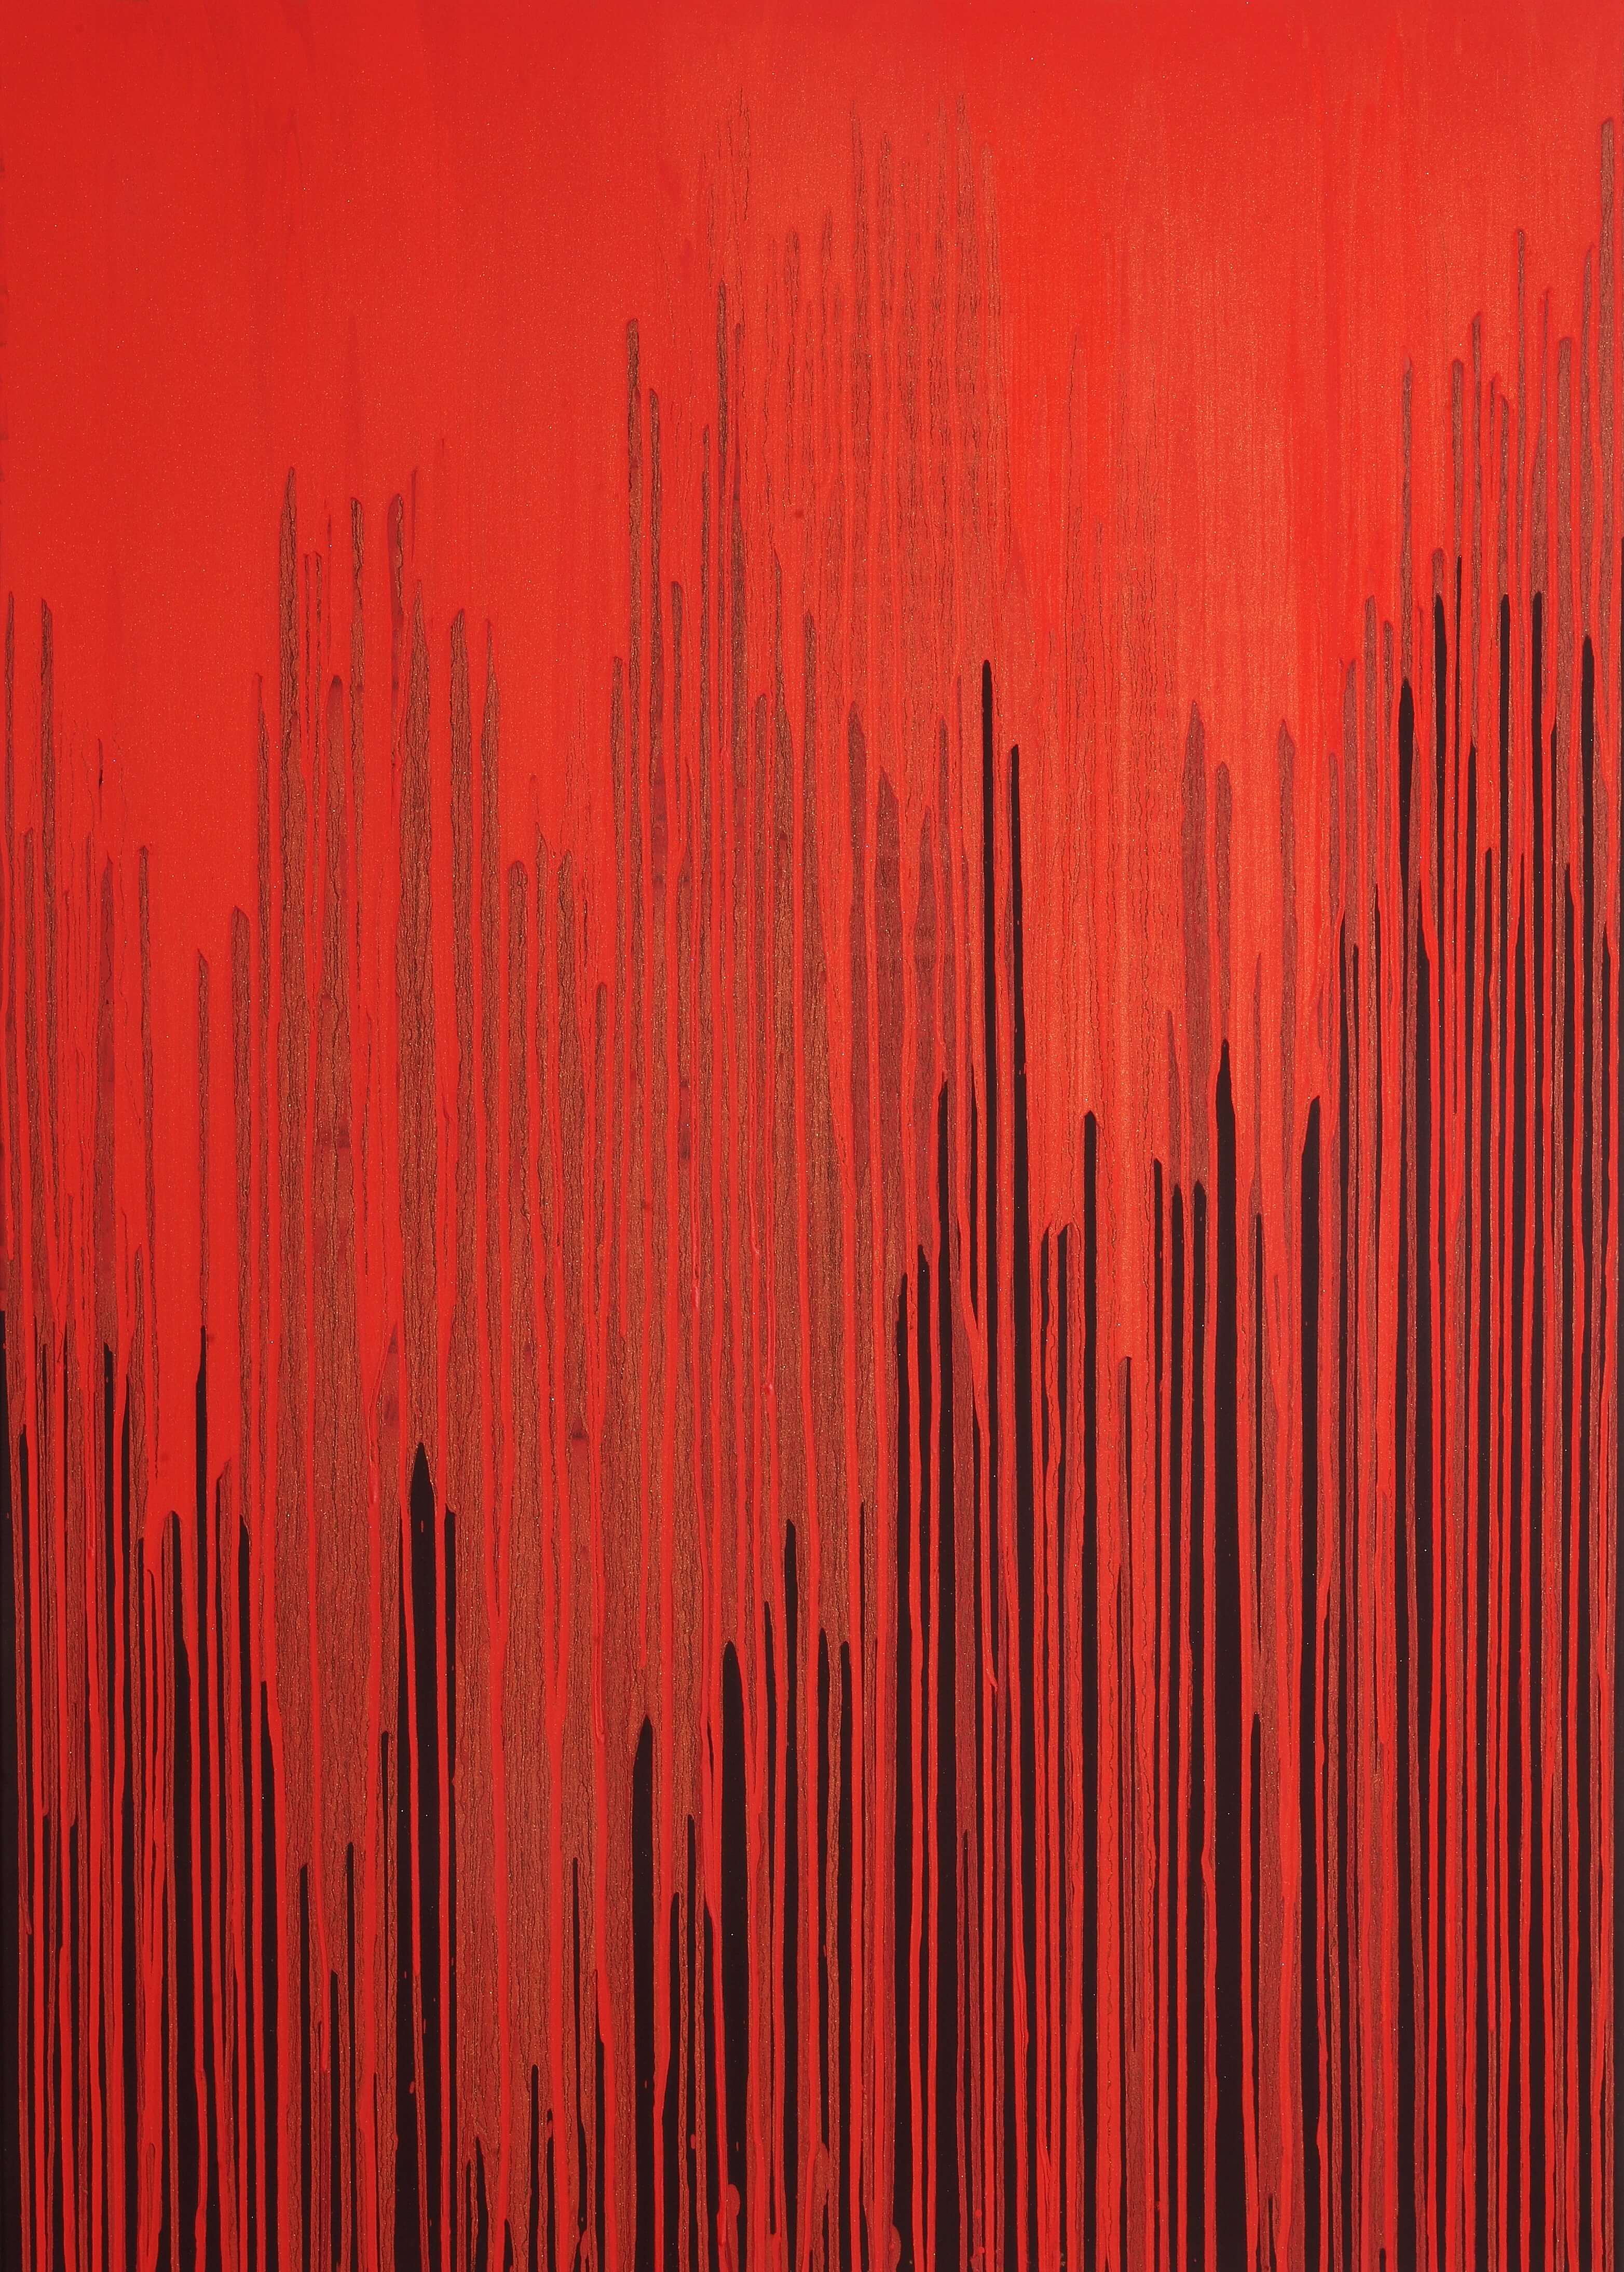 Joanna Borkowska Frequencies Red 2013 oil and gold pigment on cancas 100 x 140 cm